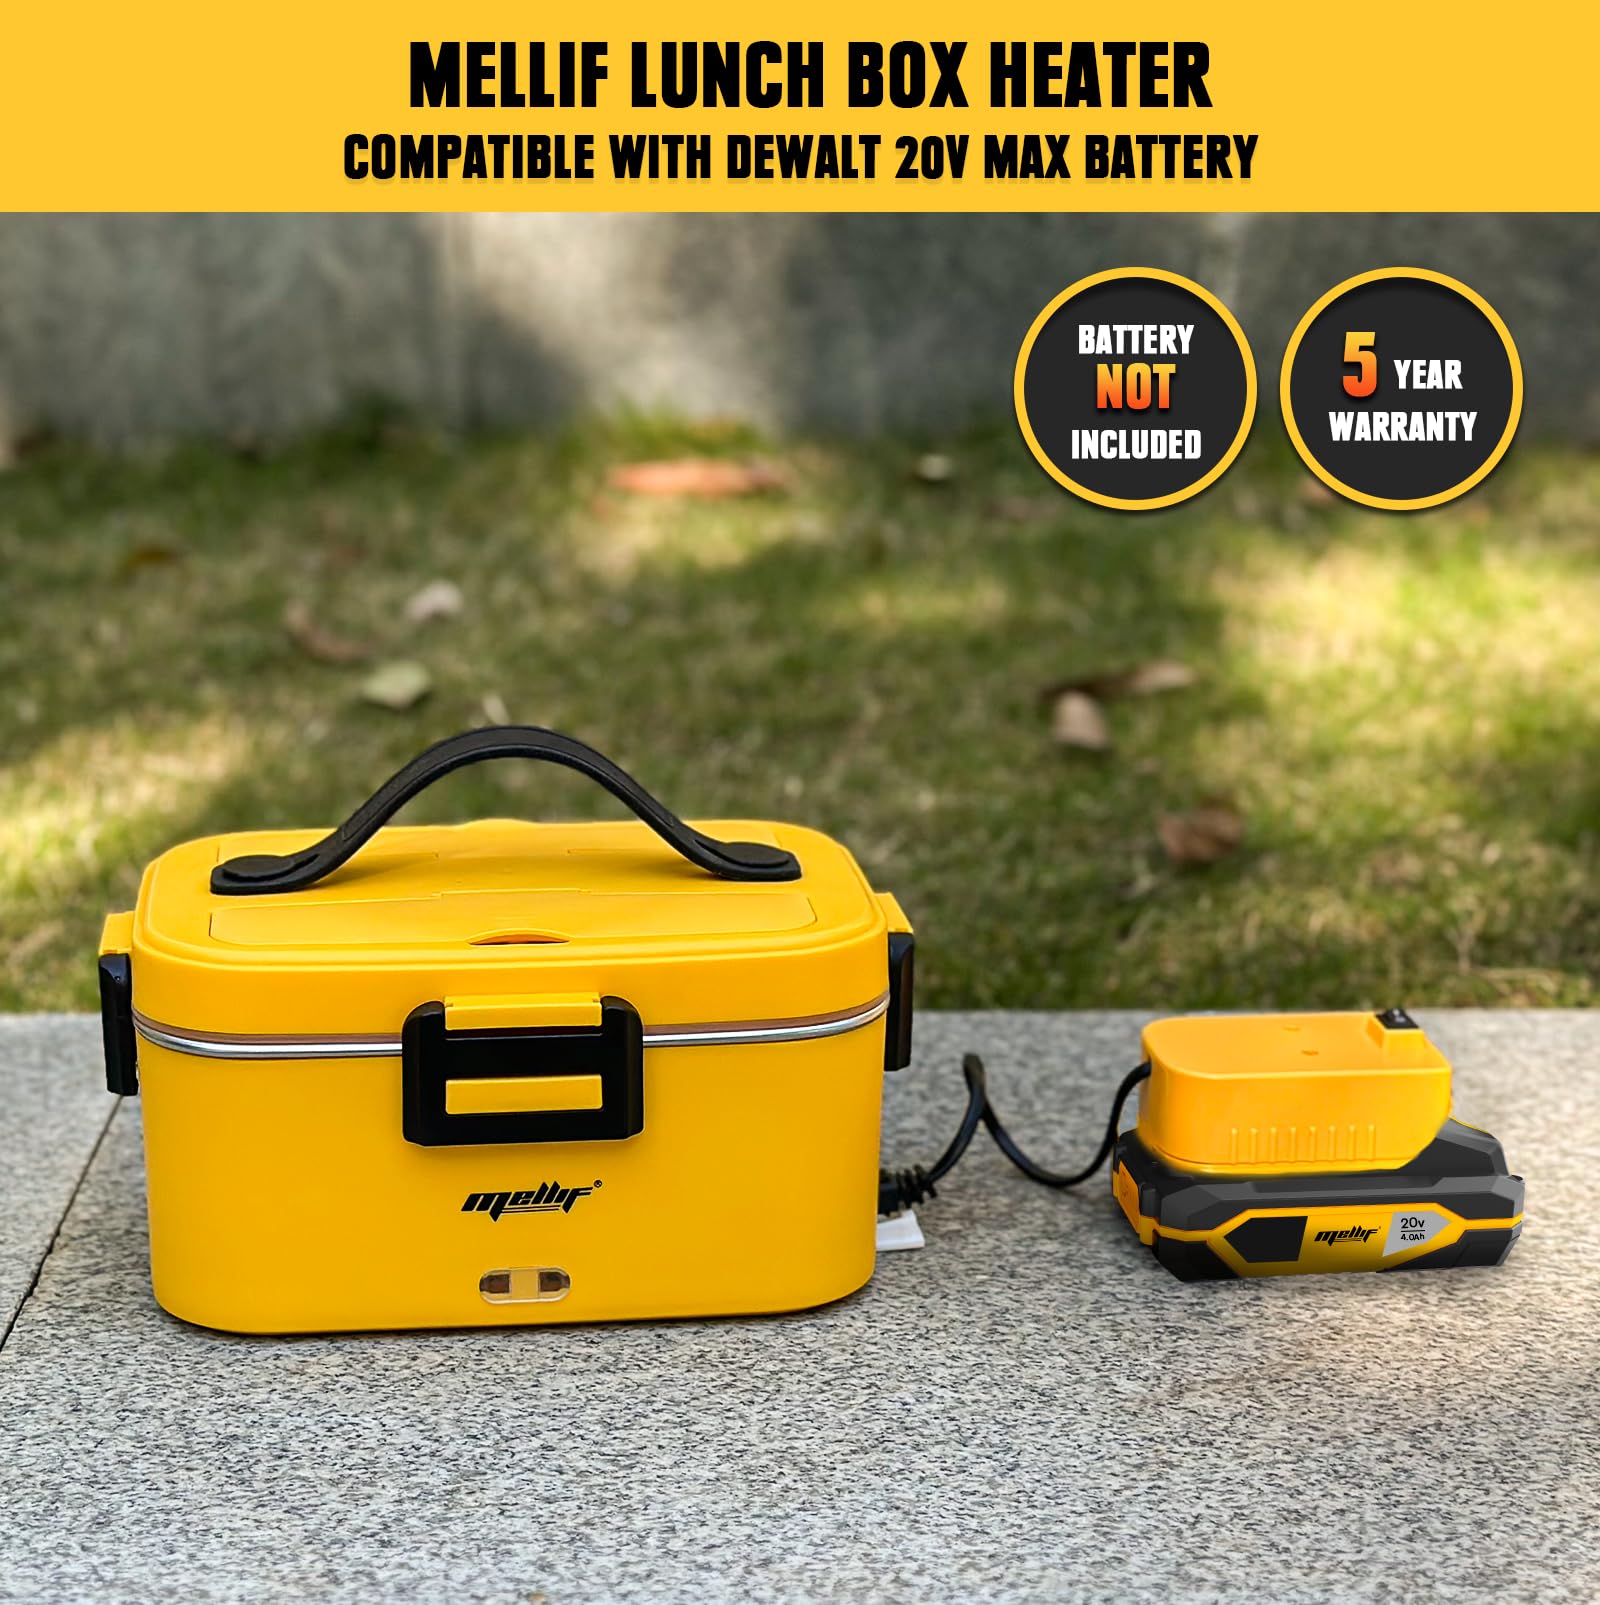 Mellif Electric Lunch Box Food Warmer Heater for Dewalt 20V Max Battery (Battery Not Included),12V 24V Heated Lunch Boxes for Adults for Car/Truck